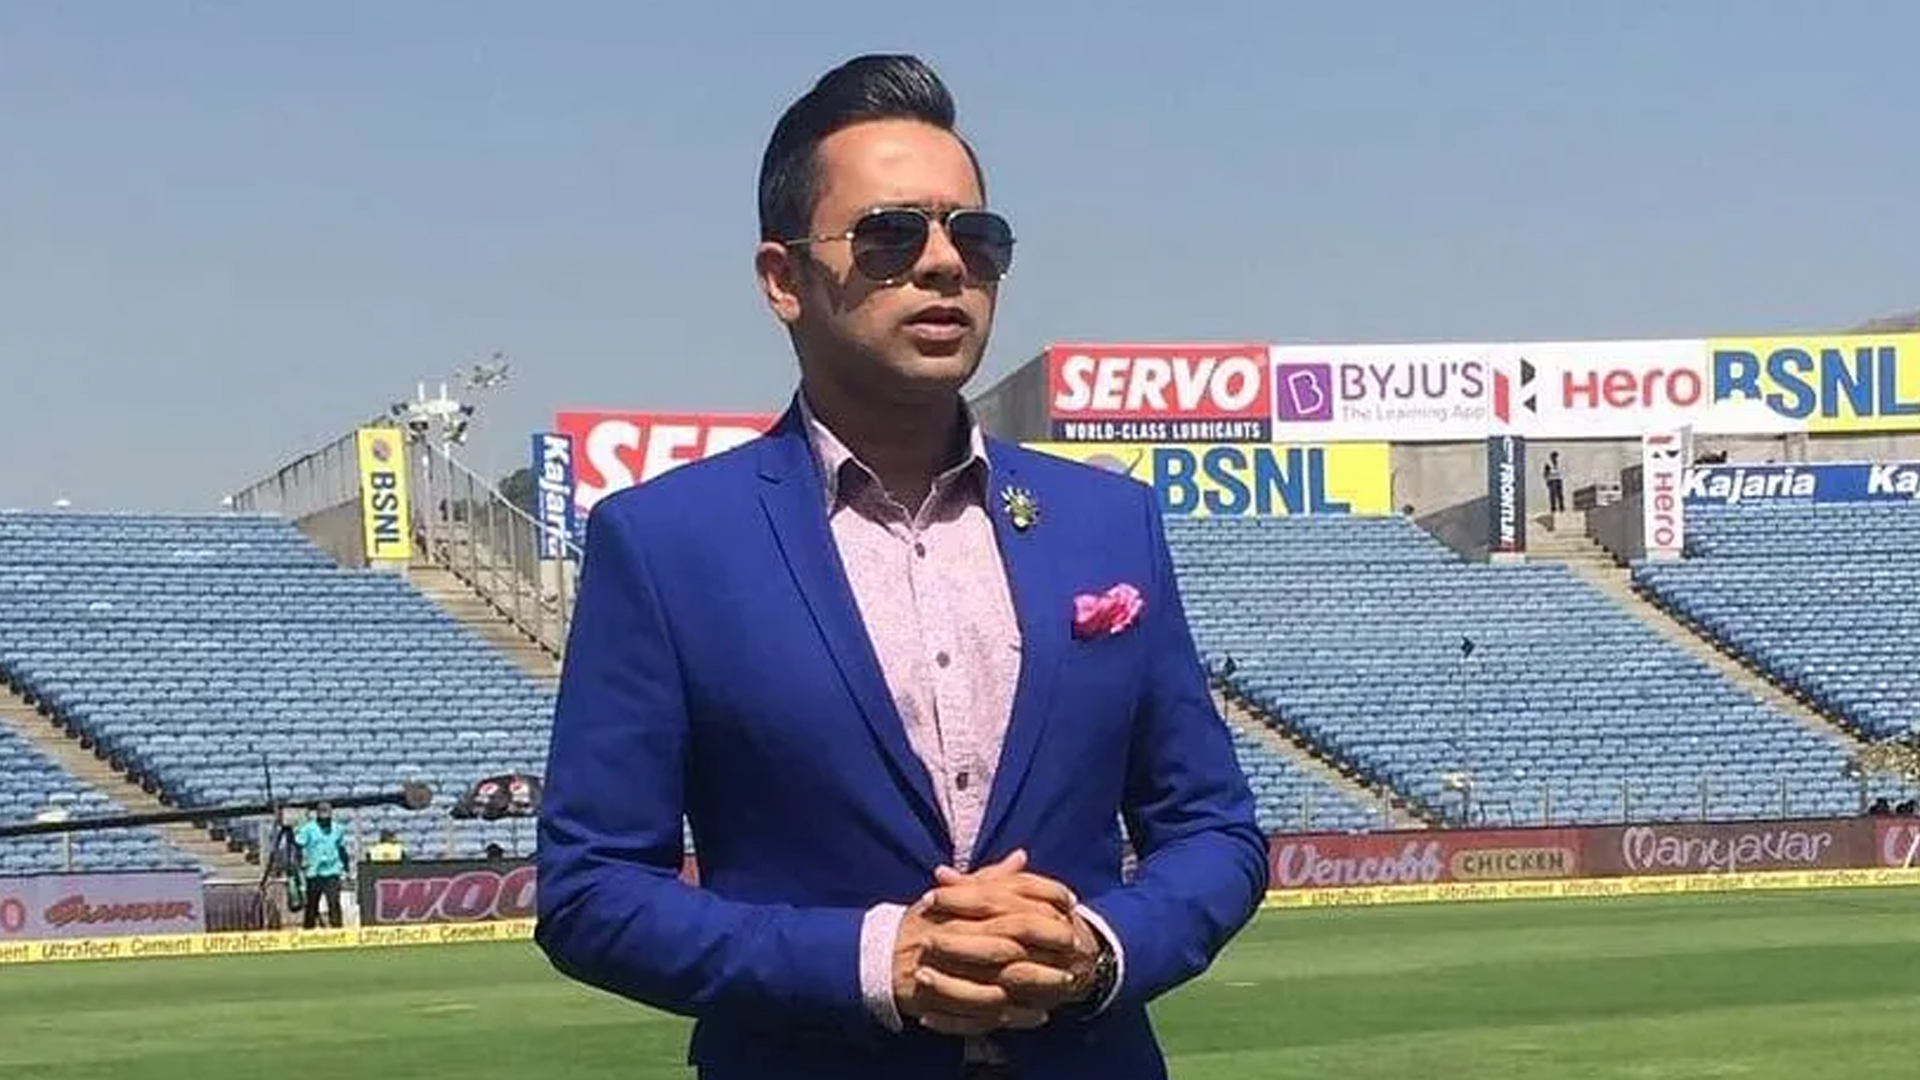 This Player Is Not Ready For T20I, Aakash Chopra Huge Statement On India's Young Star